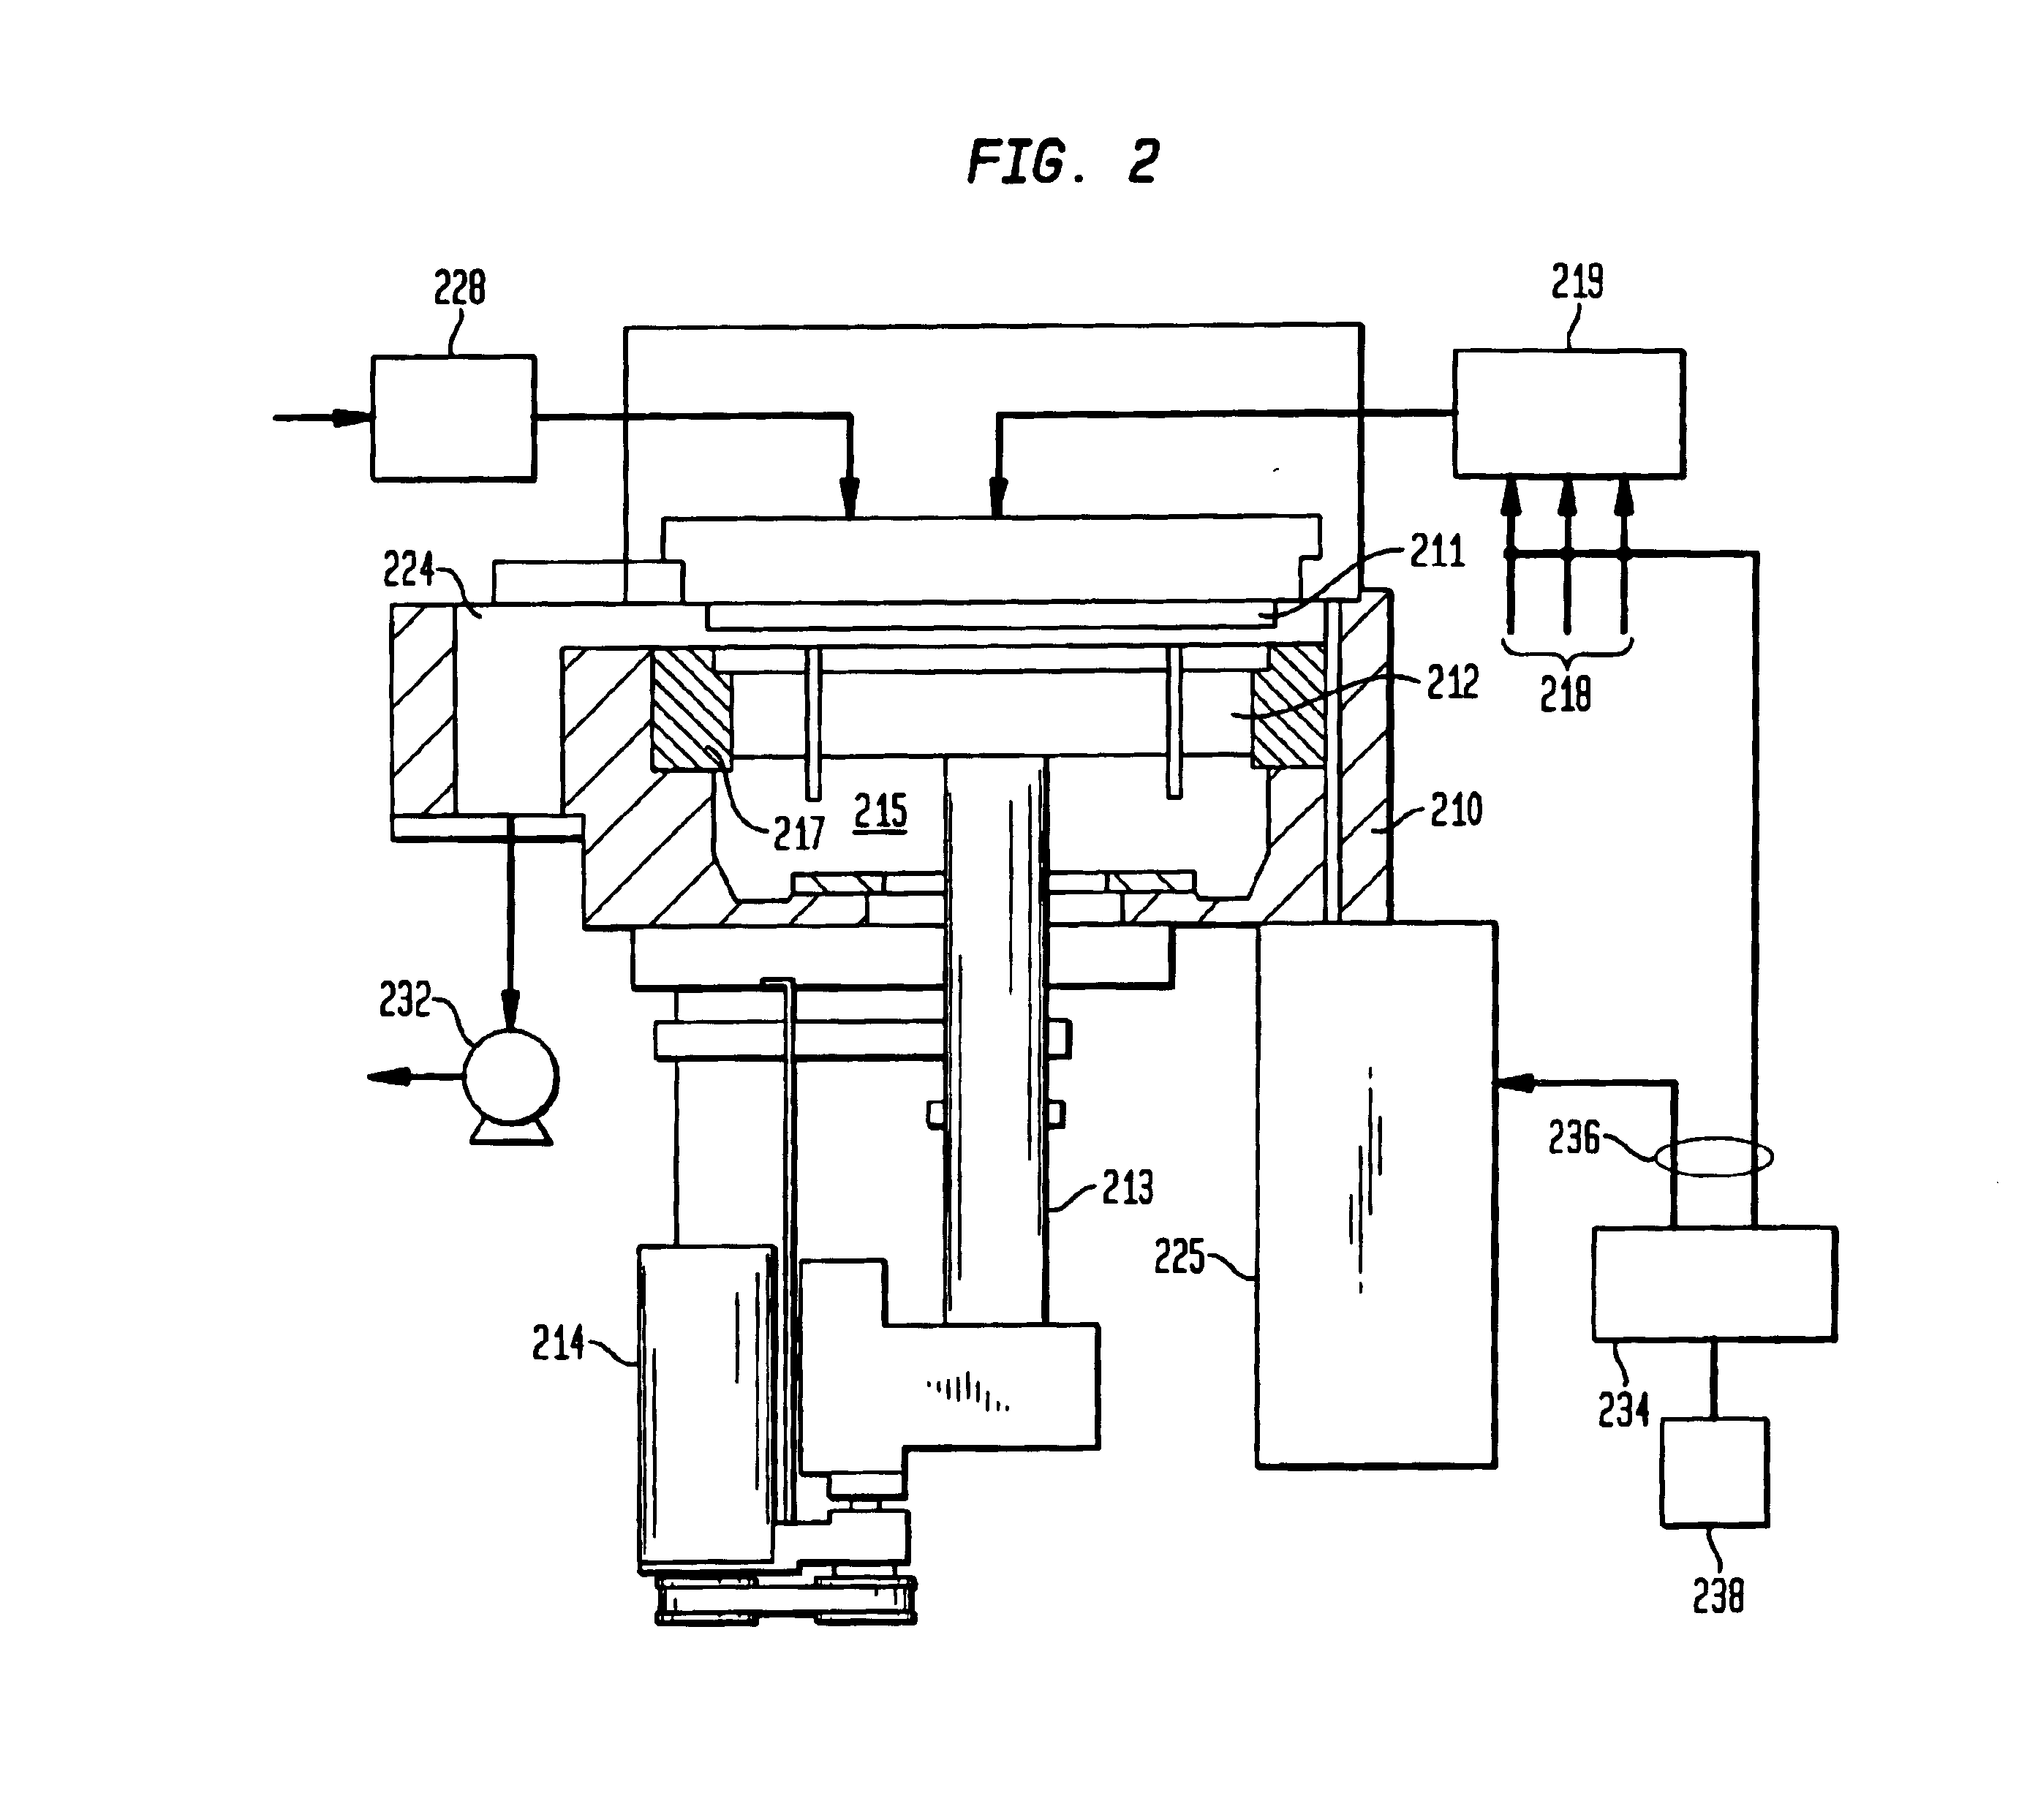 Methods and apparatus for E-beam treatment used to fabricate integrated circuit devices